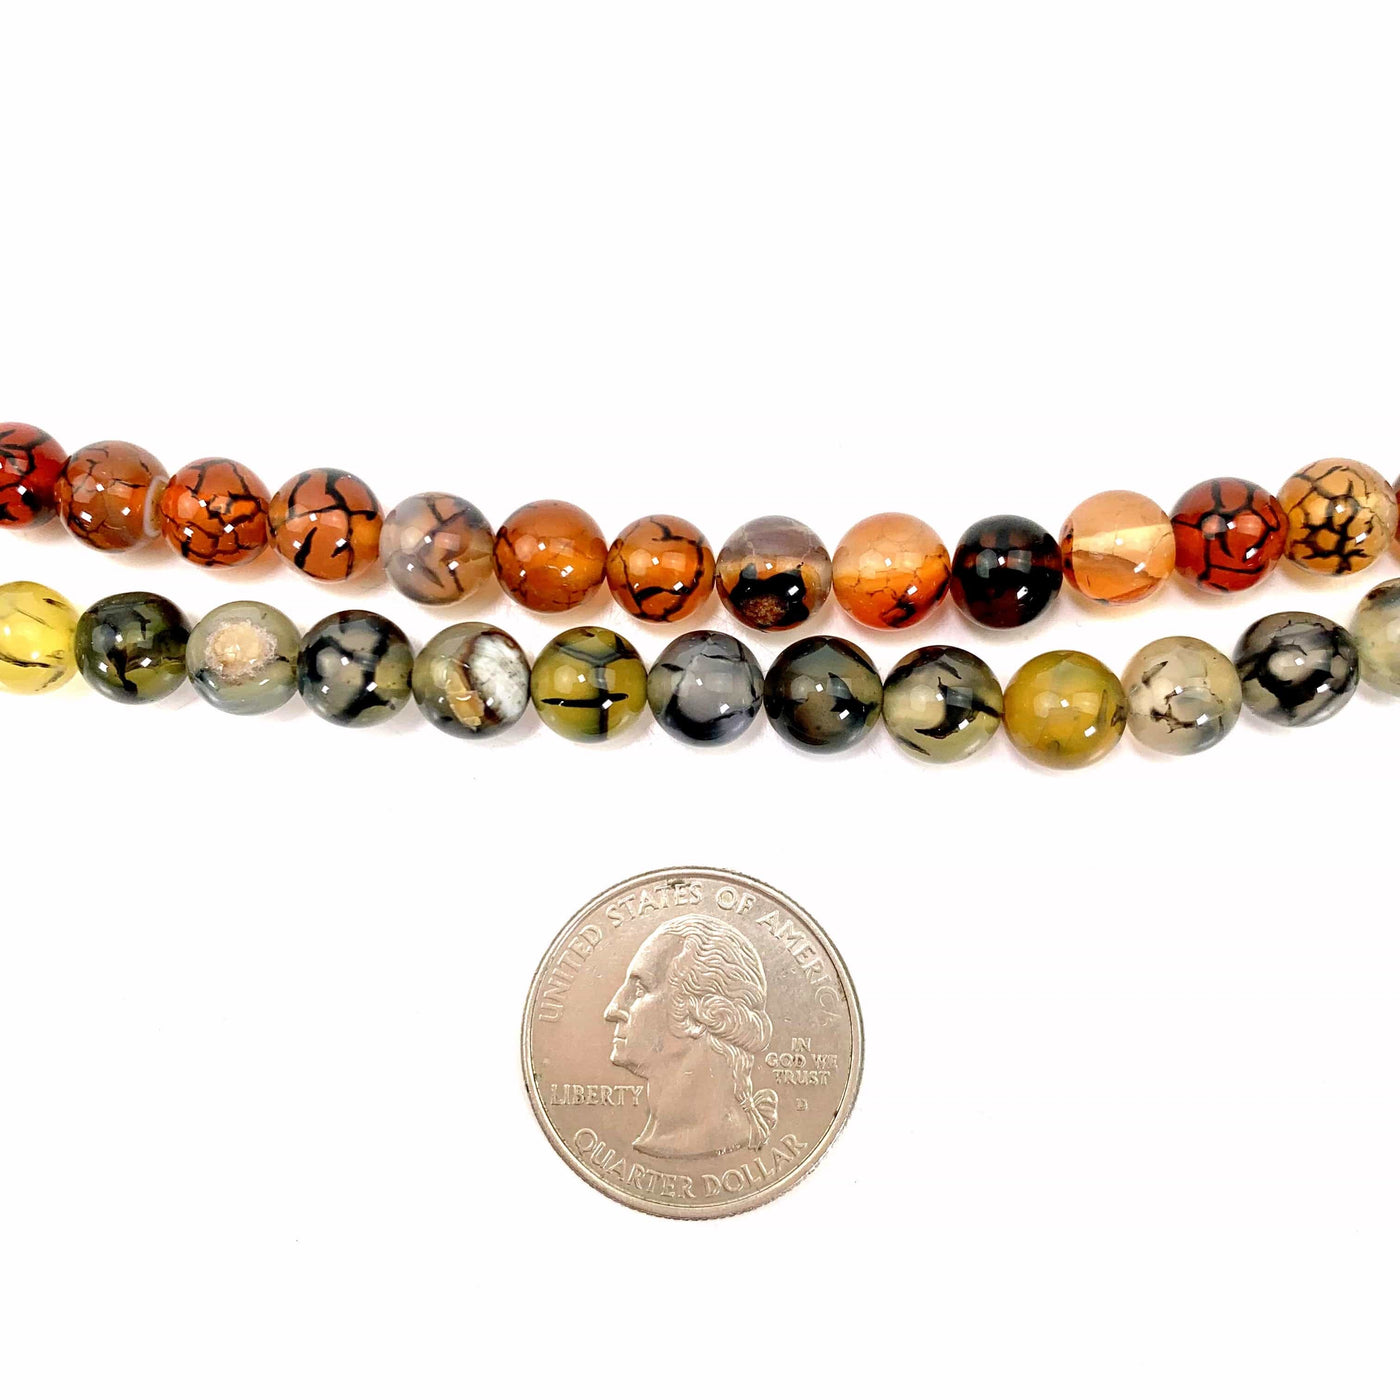 both variations of beads on a white background with a quarter next to them